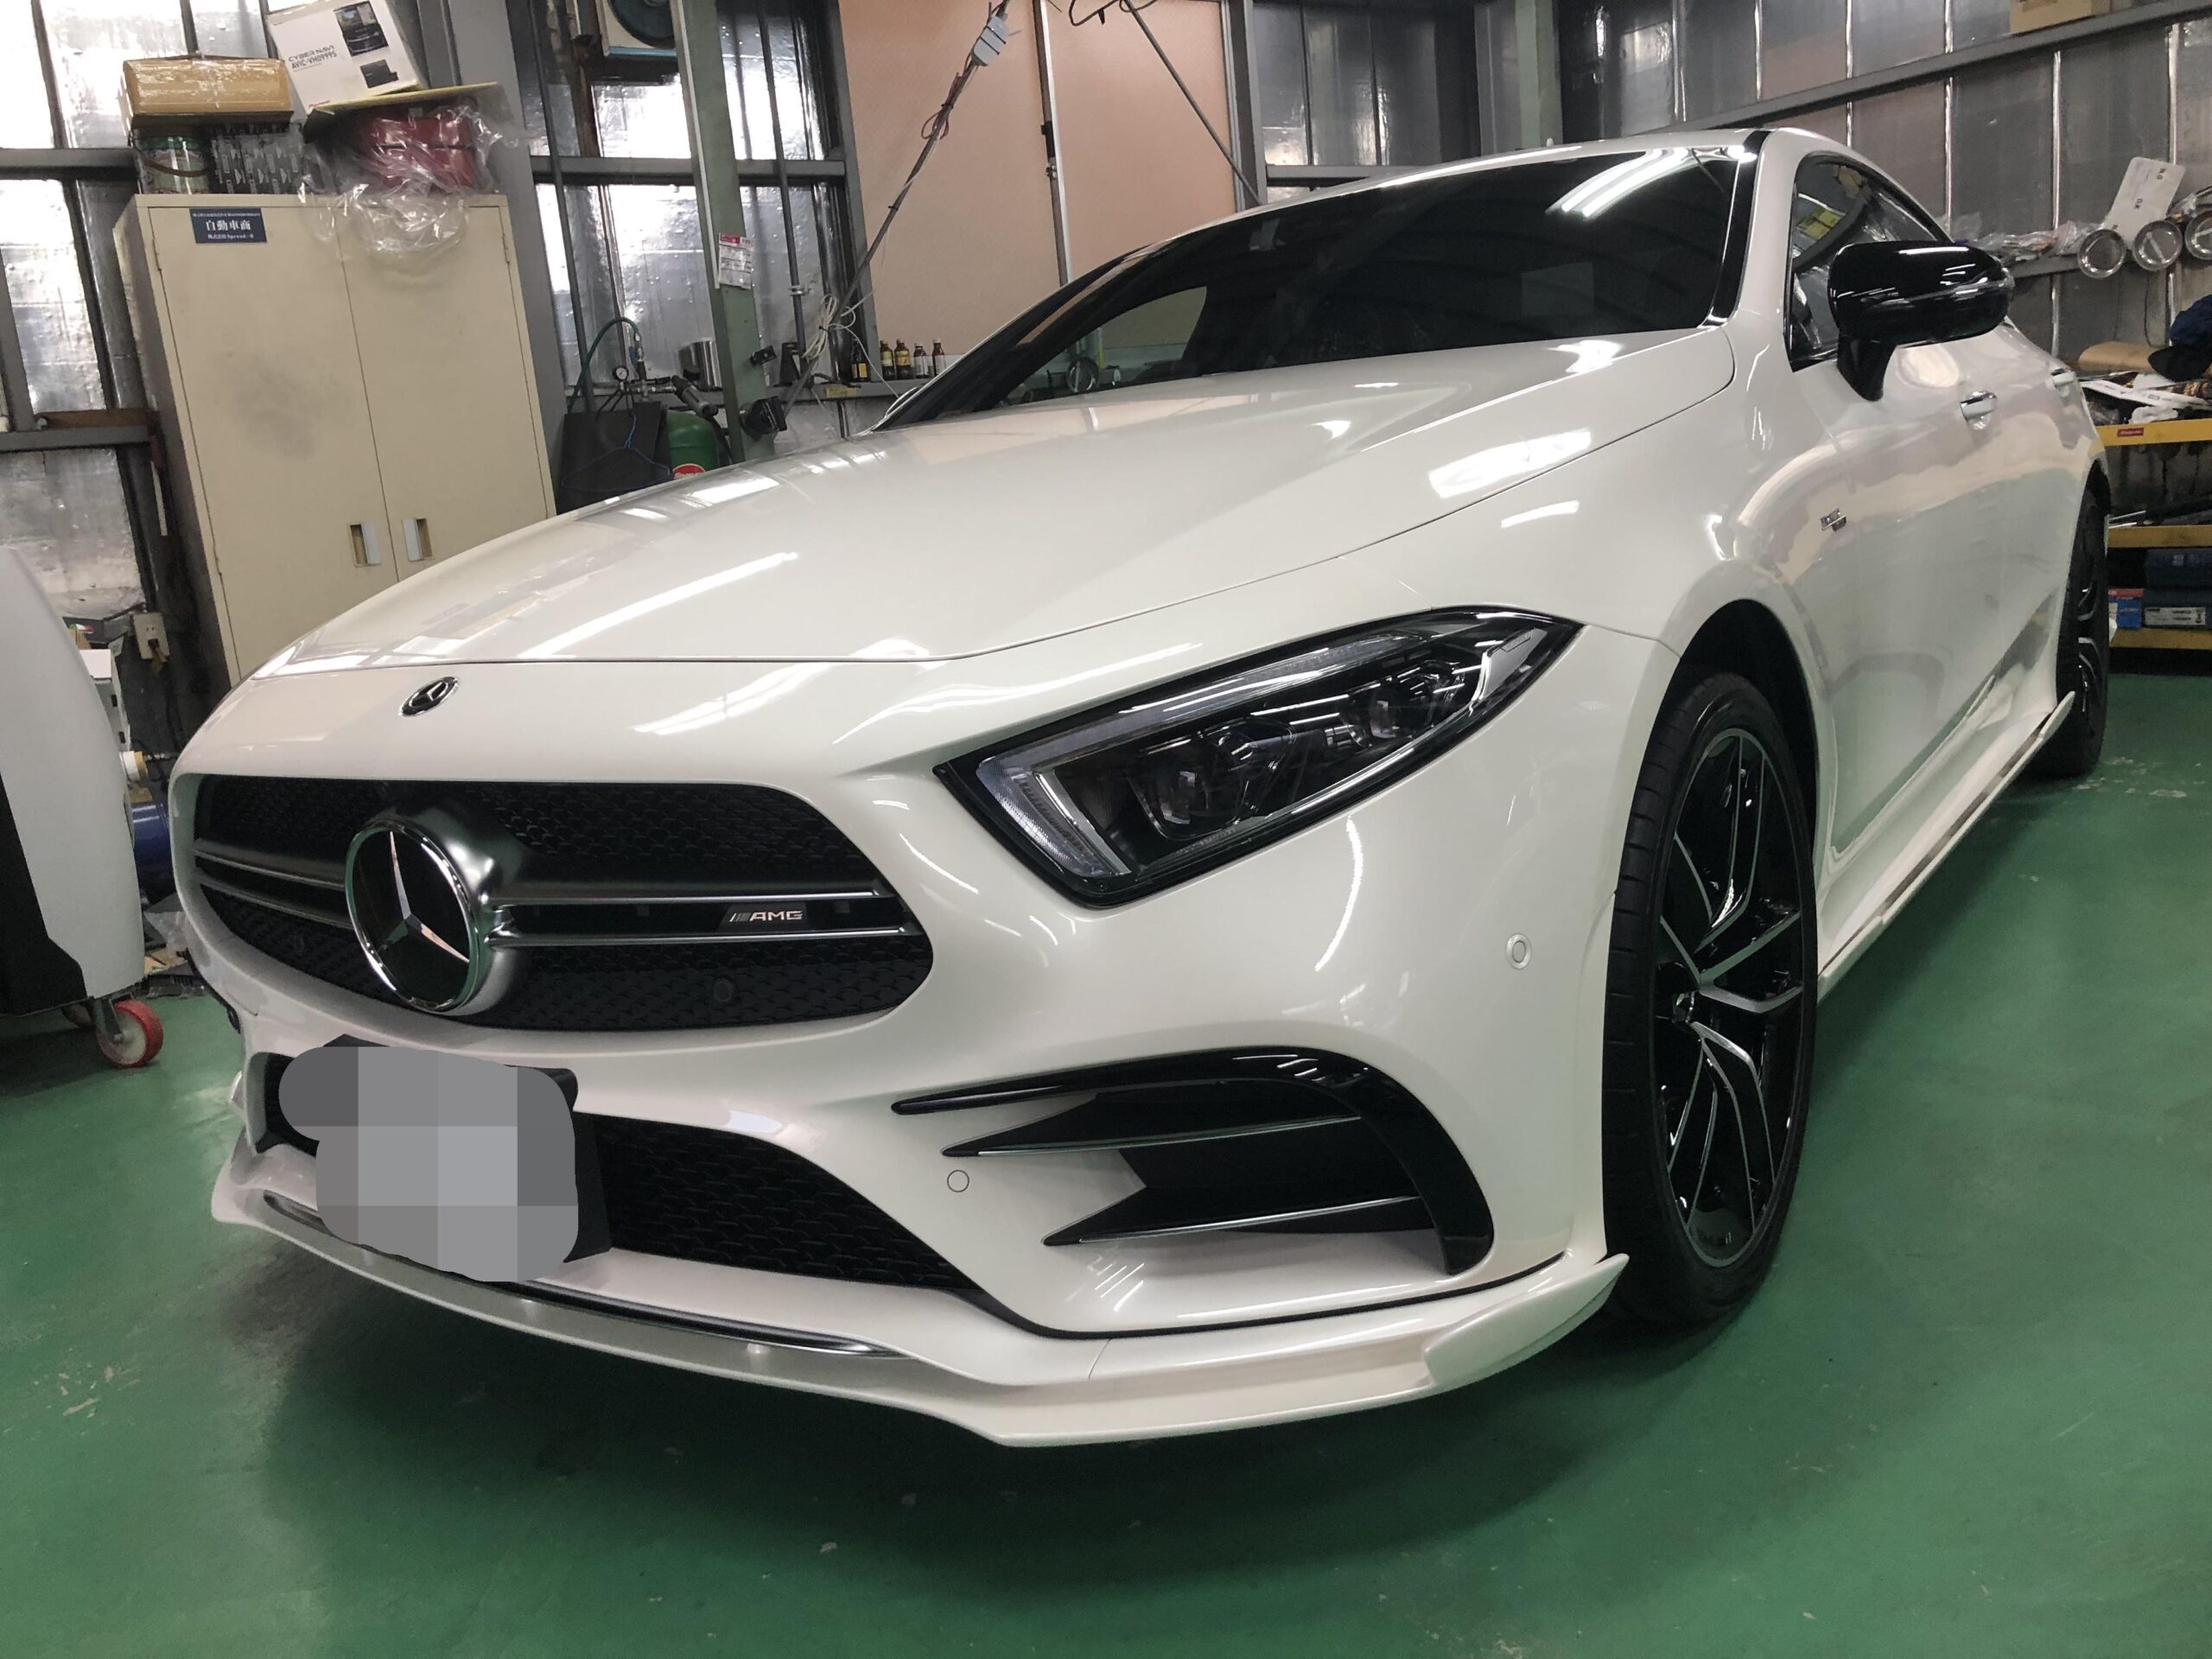 Mercedes Benz メルセデスベンツ CLS53 AMG  EXE-2000施工